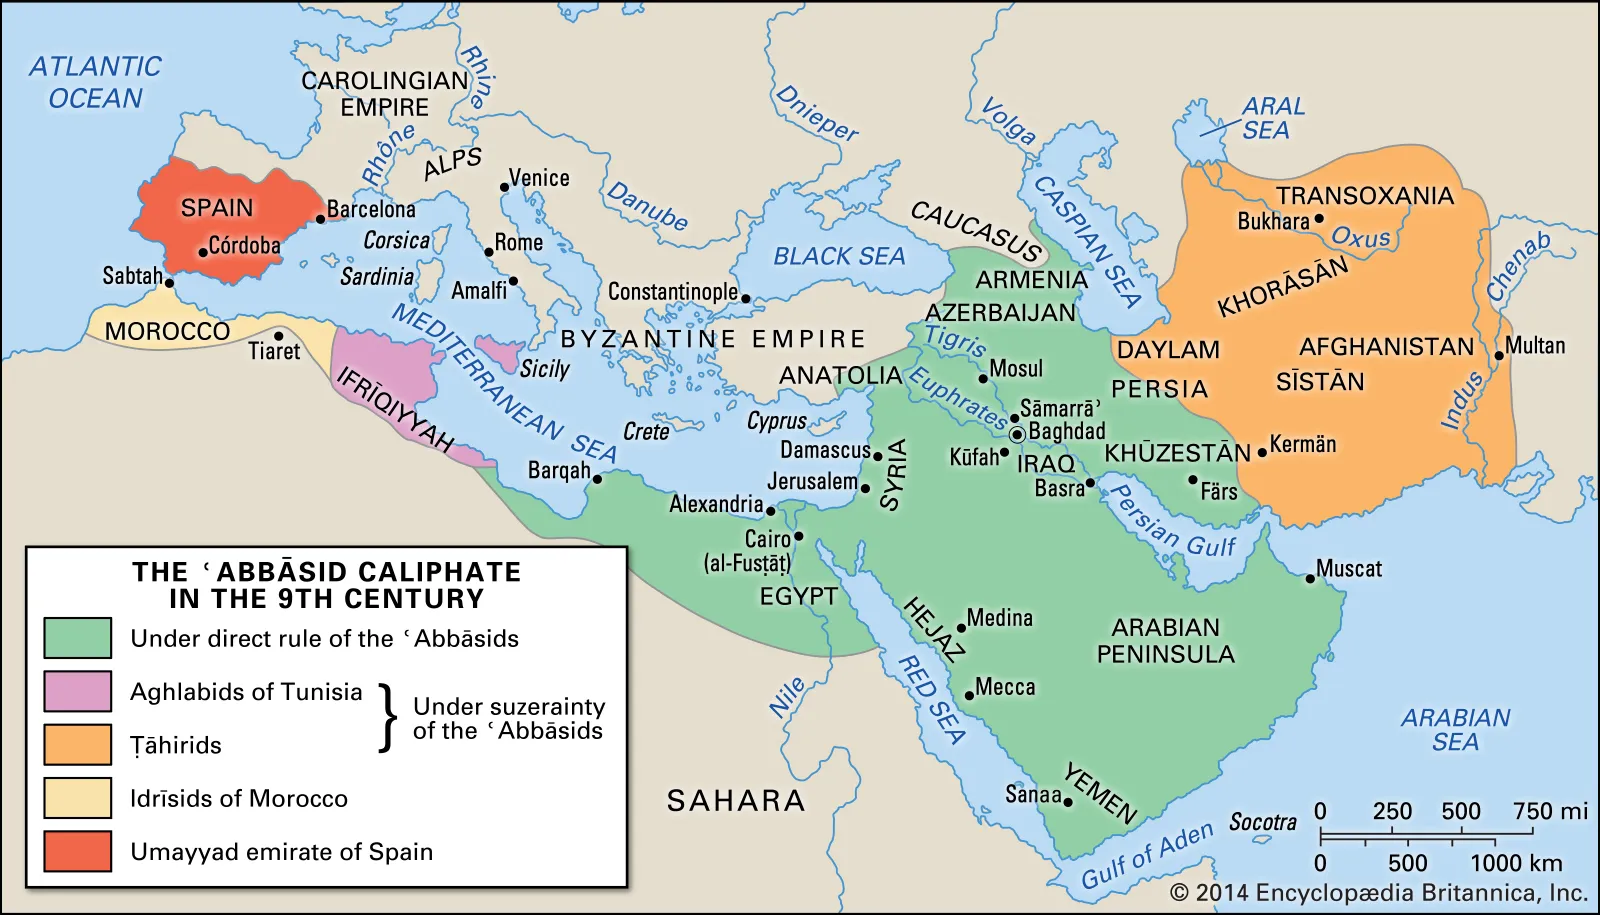 <p>An Arab dynasty of caliphs (successors to the Prophet) who ruled the Islamic world from 750 CE until its fall to the Mongols in 1258 (who ruled much of Persia for a long time). The Arab dynasty&apos;s political grip on the Empire slipped away fairly quickly as many governors and military commanders assumed autonomy of their regions whilst giving allegiance to the caliph in Baghdad.</p>